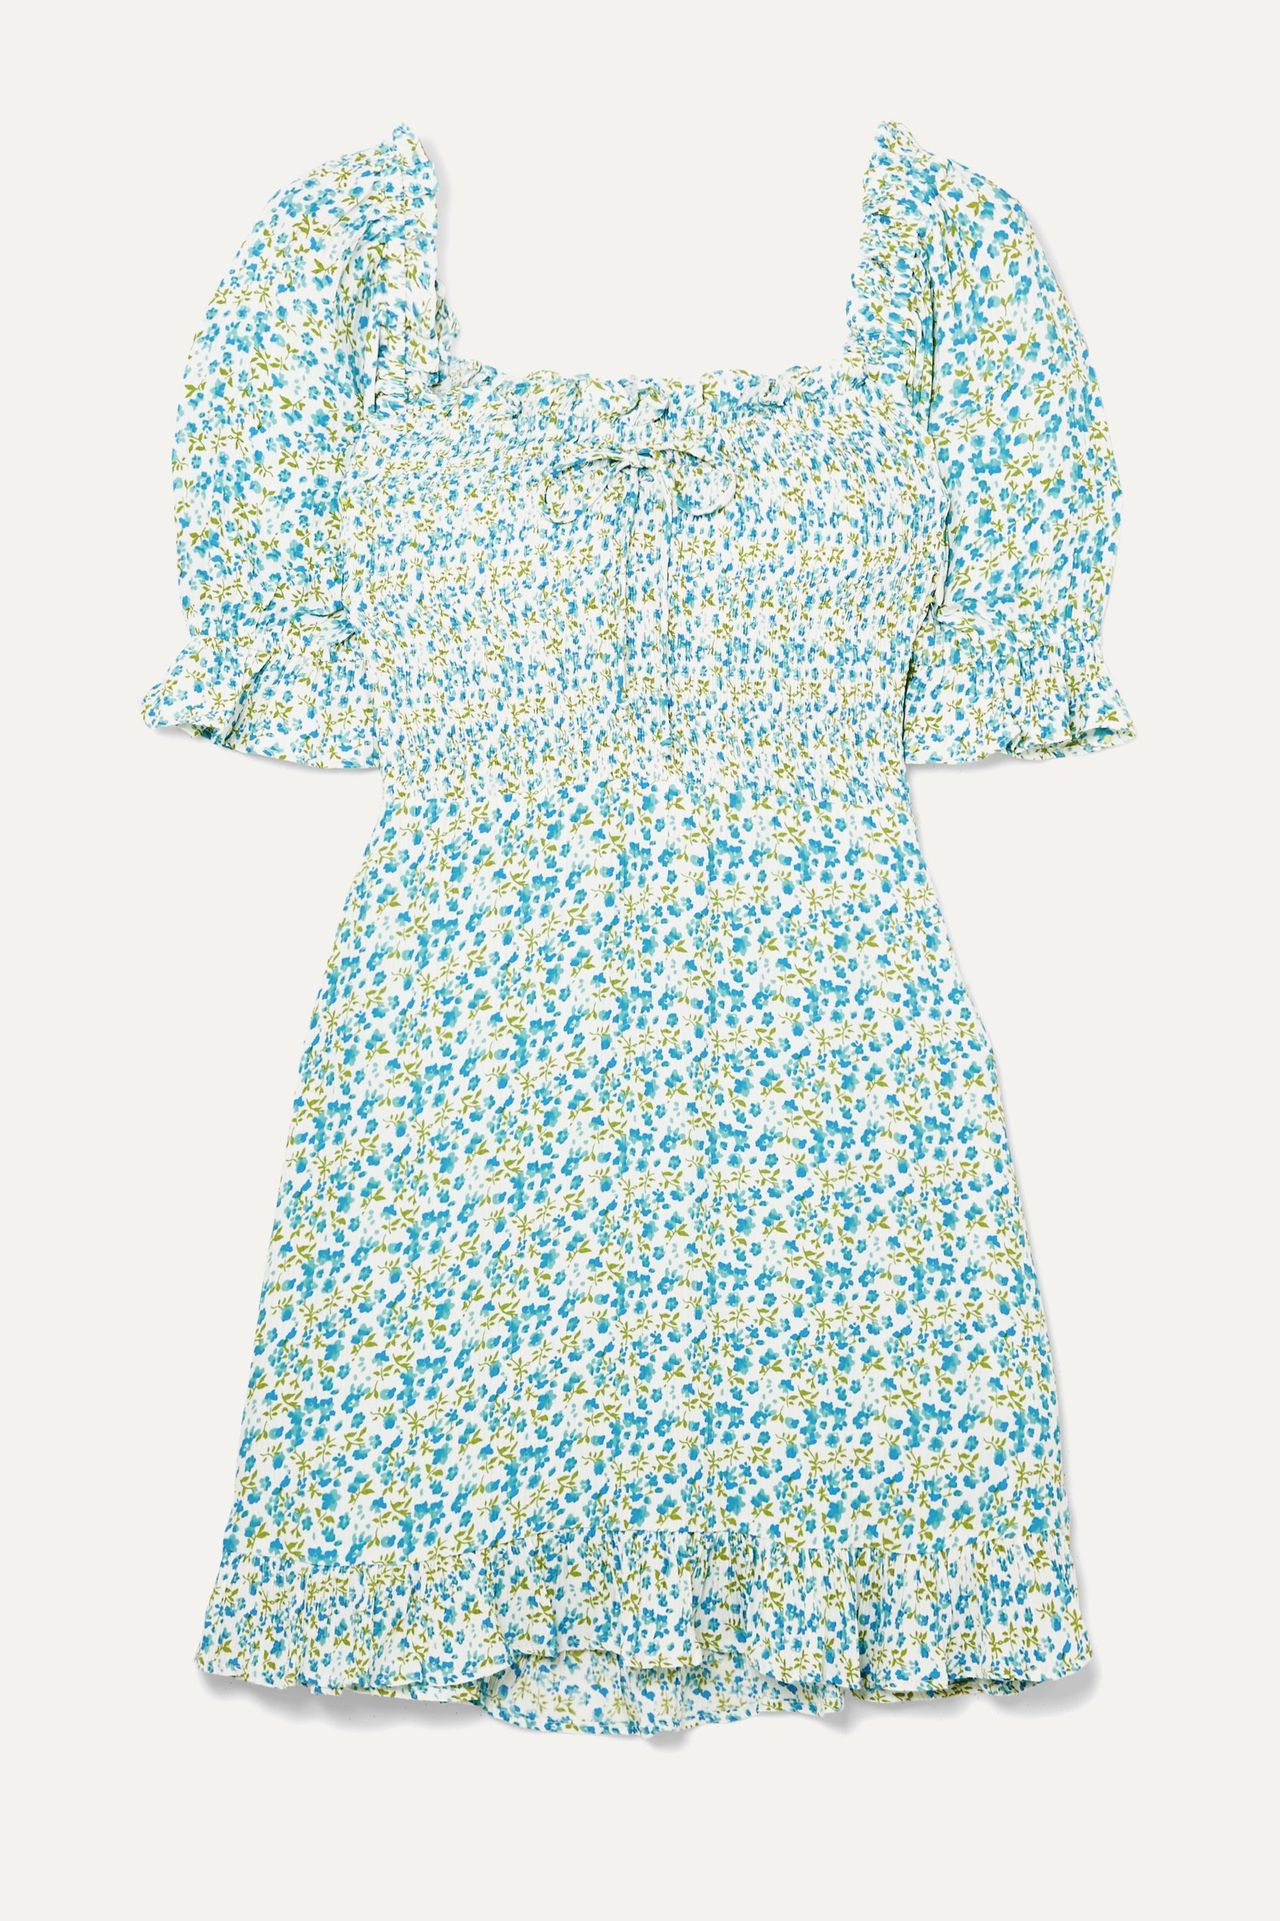 The 40 Best Floral Dresses for Summer | Who What Wear